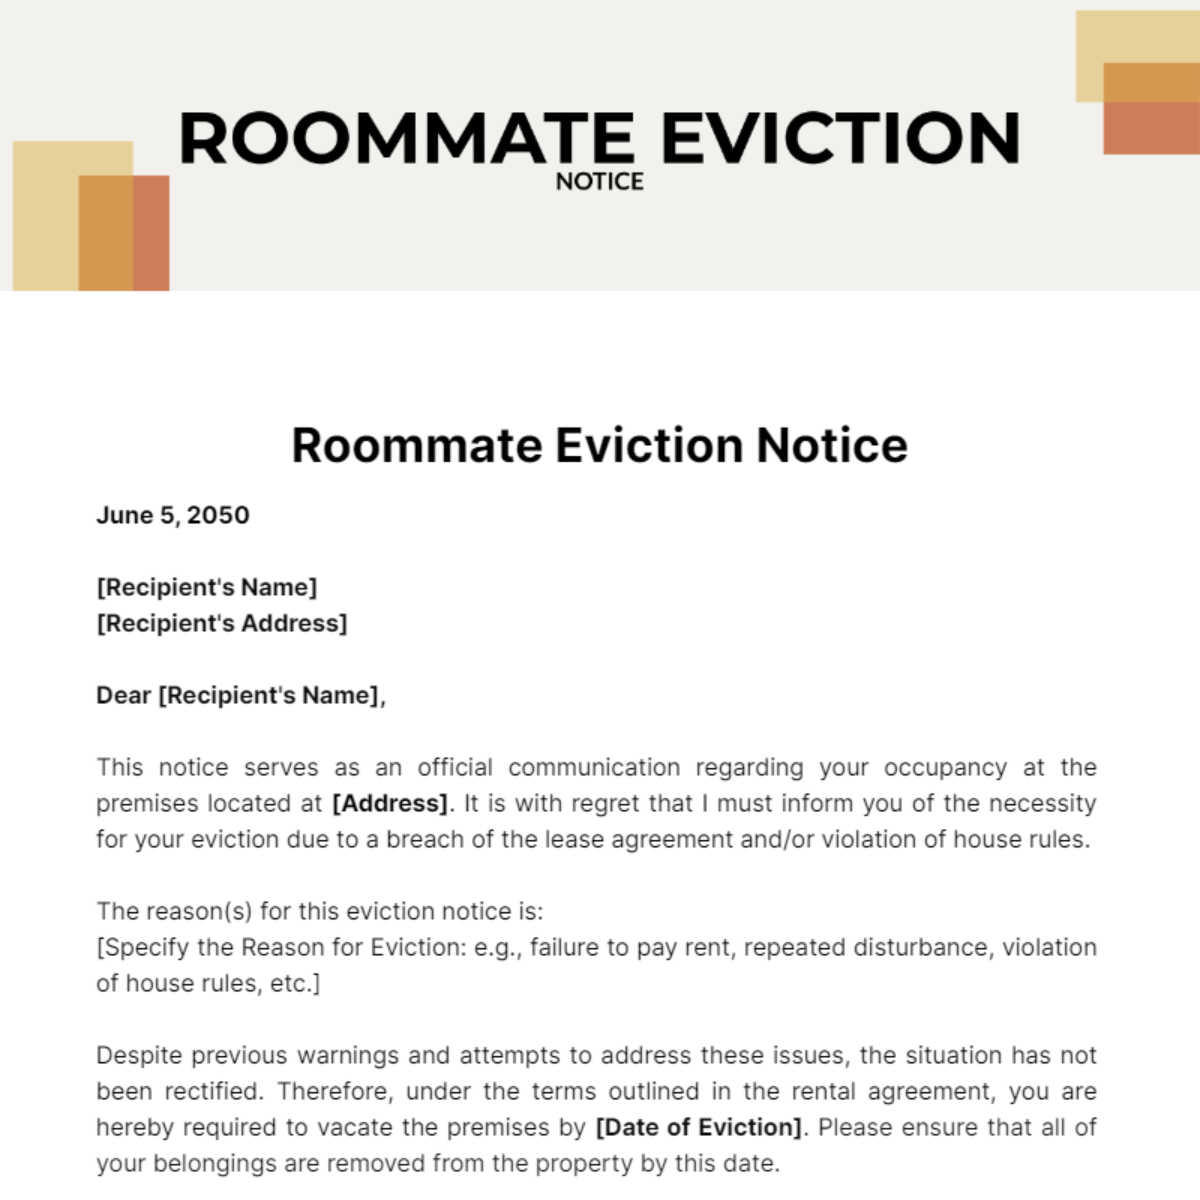 Roommate Eviction Notice Template